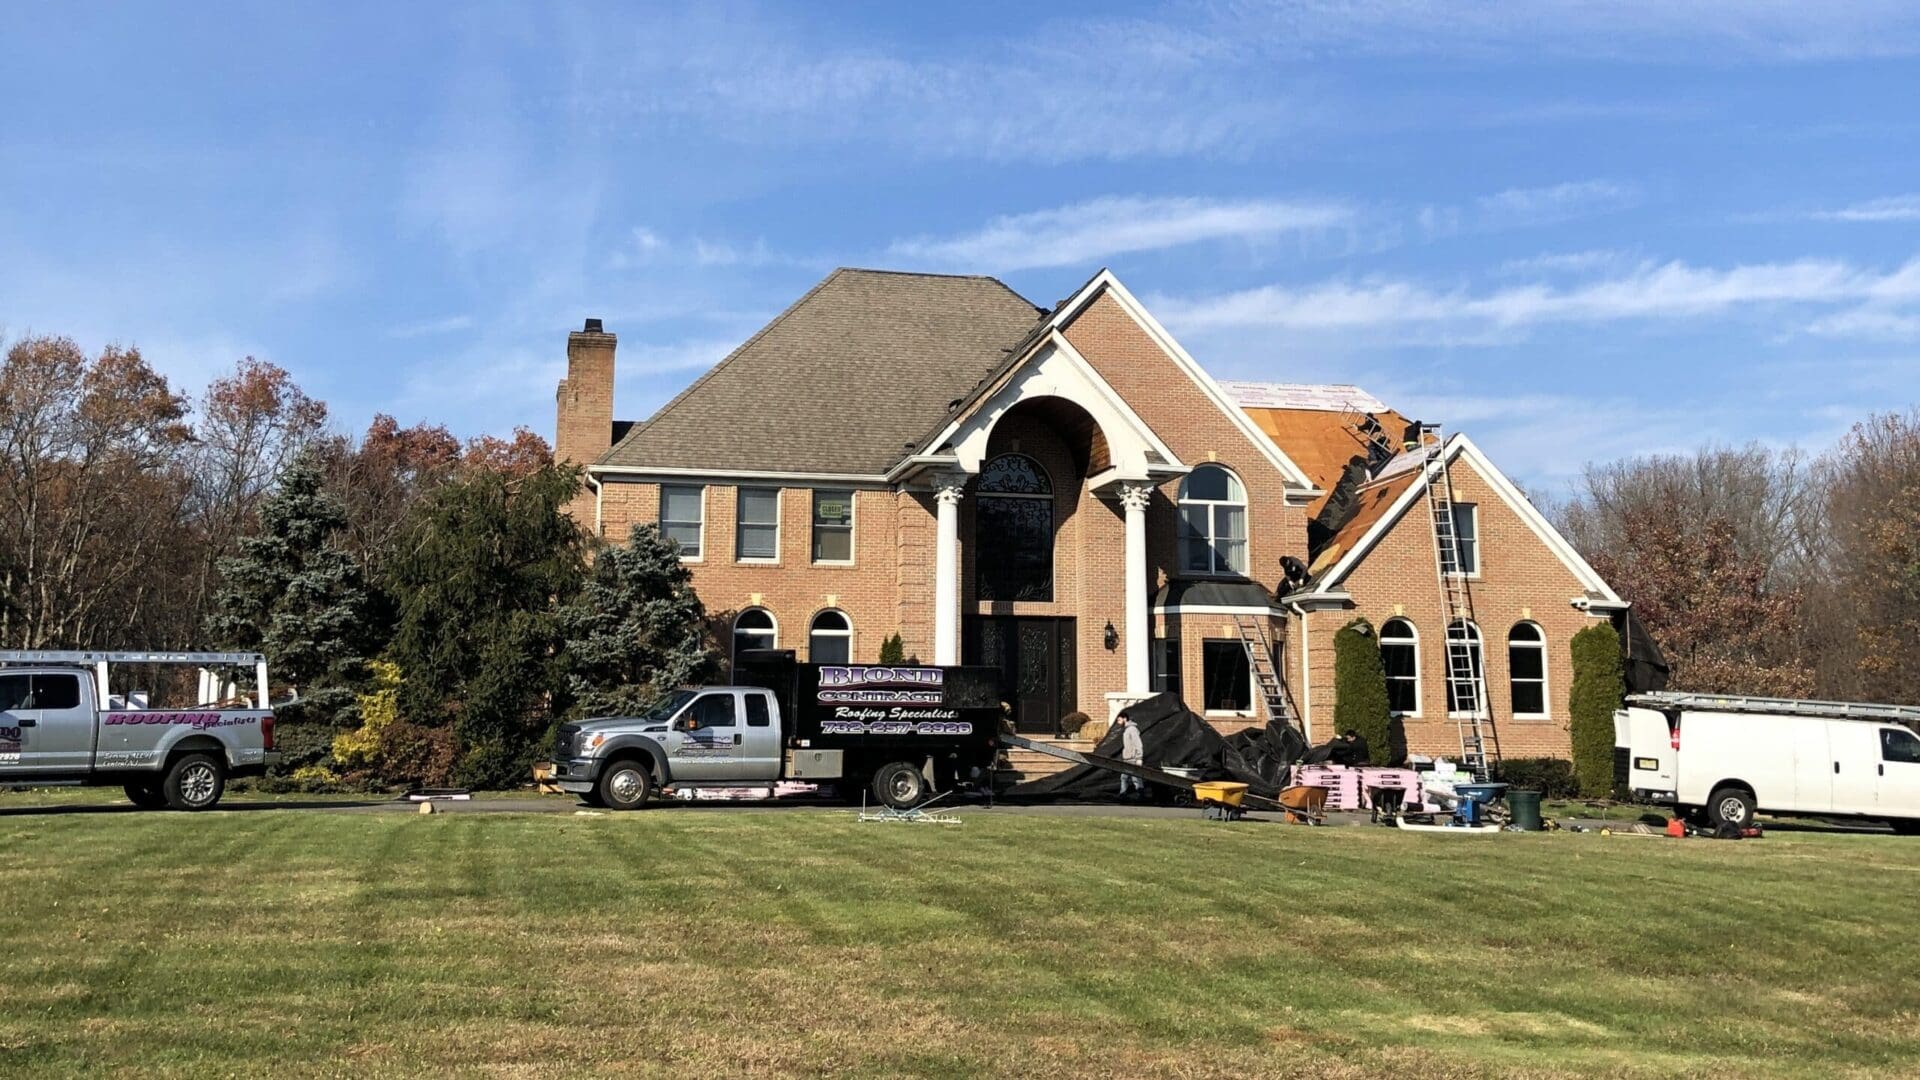 A roofing truck parked in front of a large house.